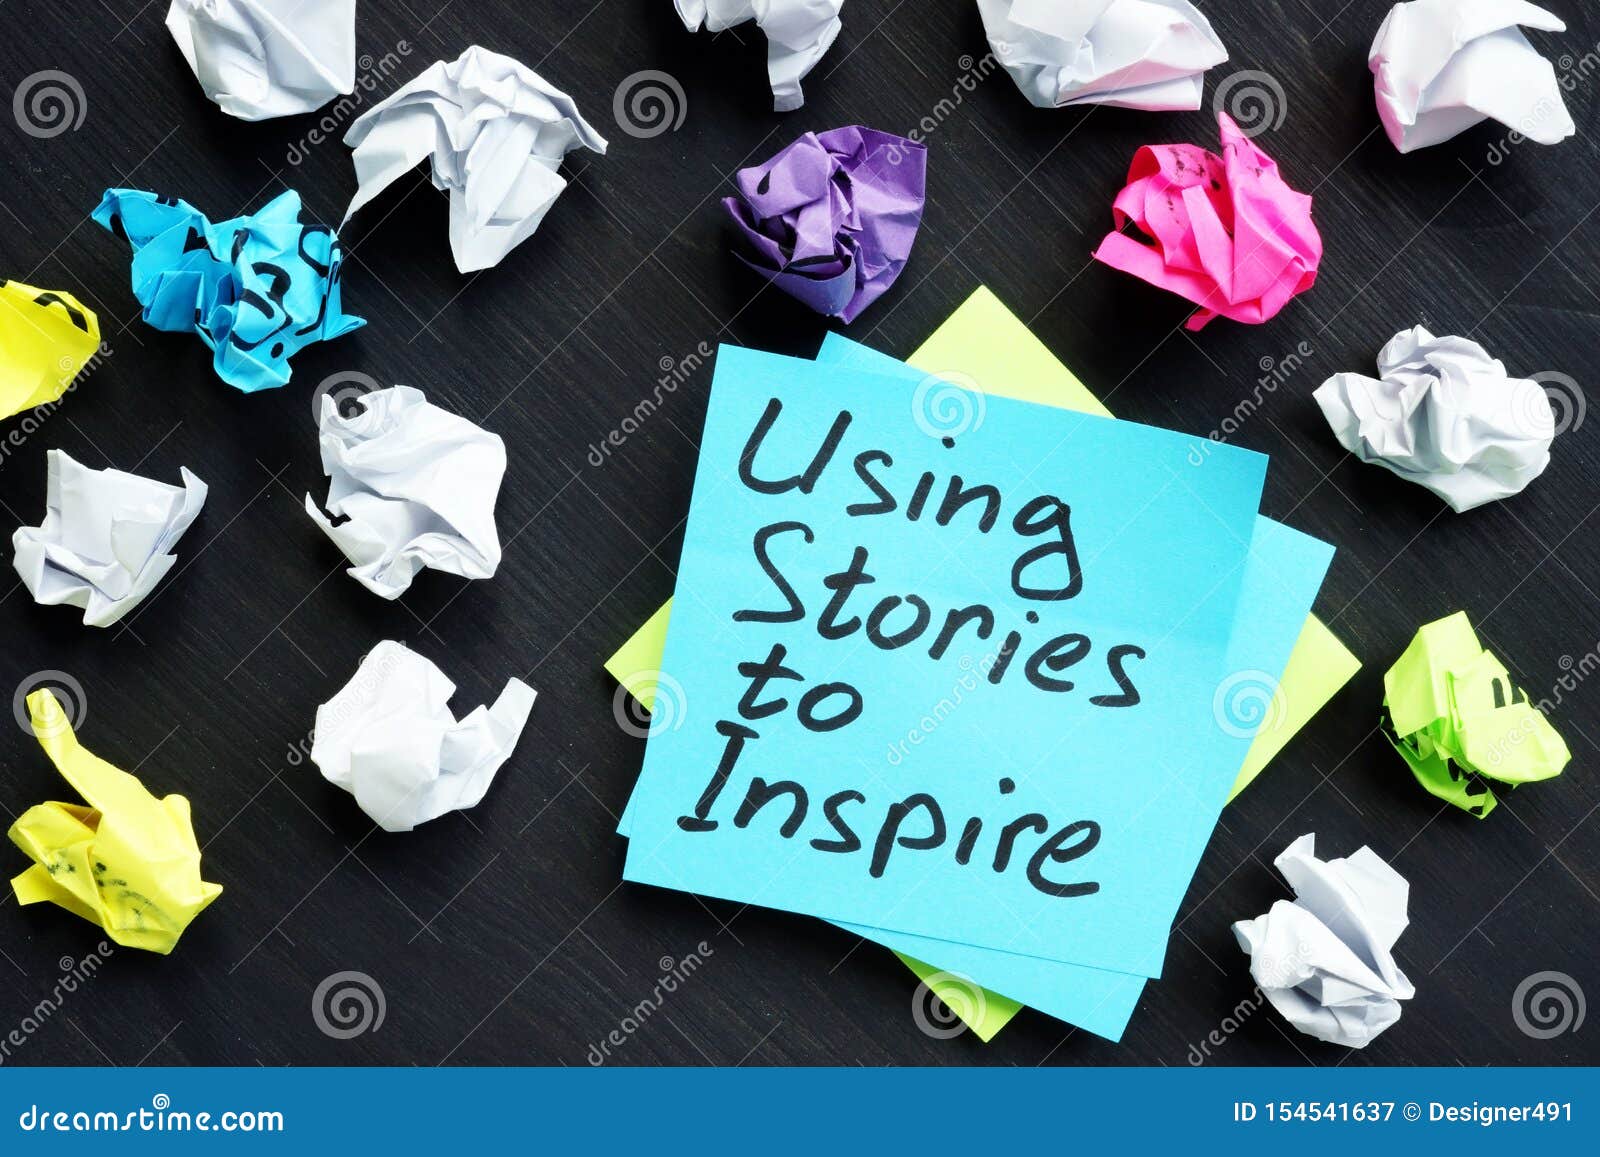 using stories to inspire. influence of storytelling